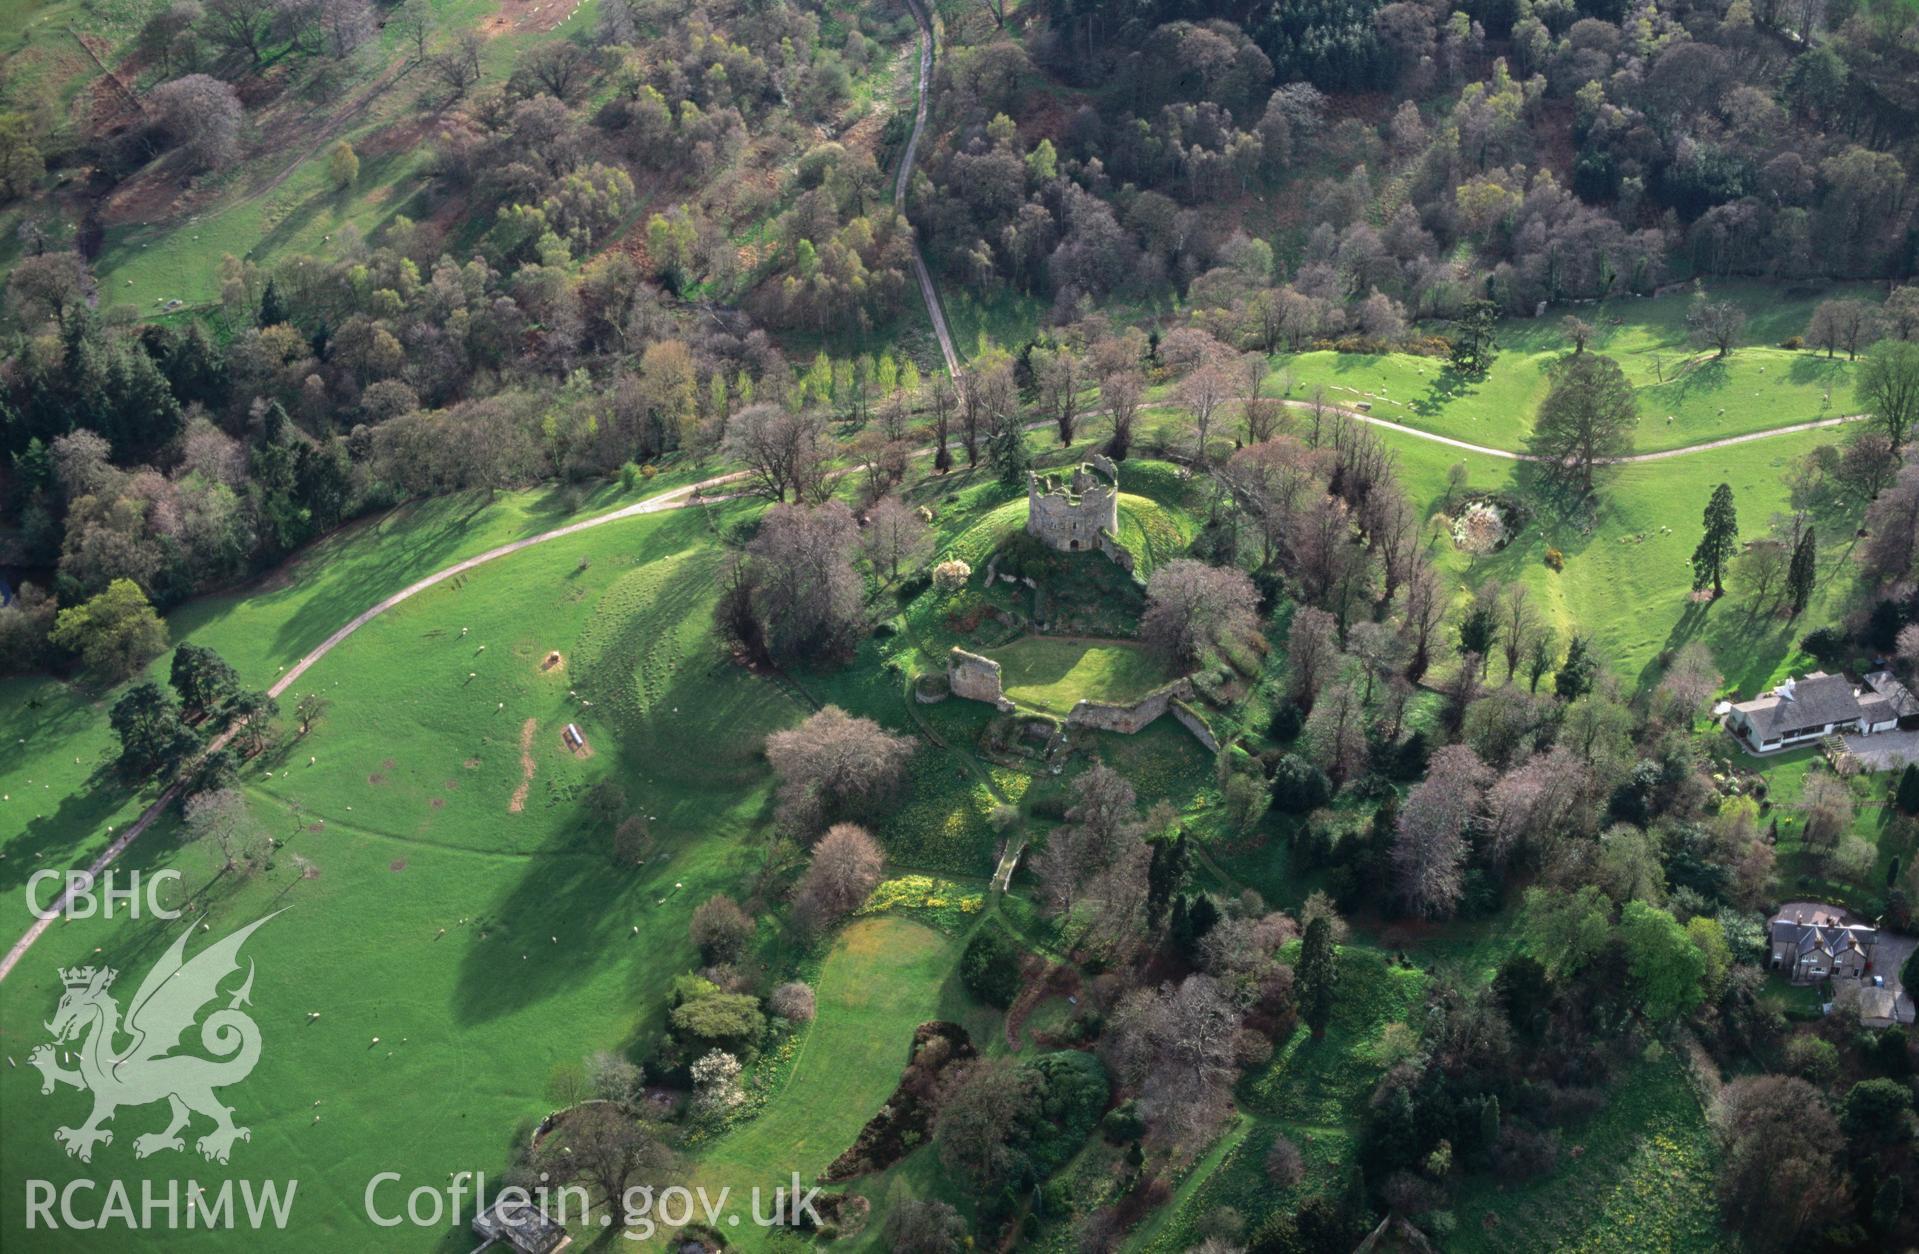 RCAHMW colour oblique aerial photograph of Hawarden Castle taken on 07/04/1995 by C.R. Musson